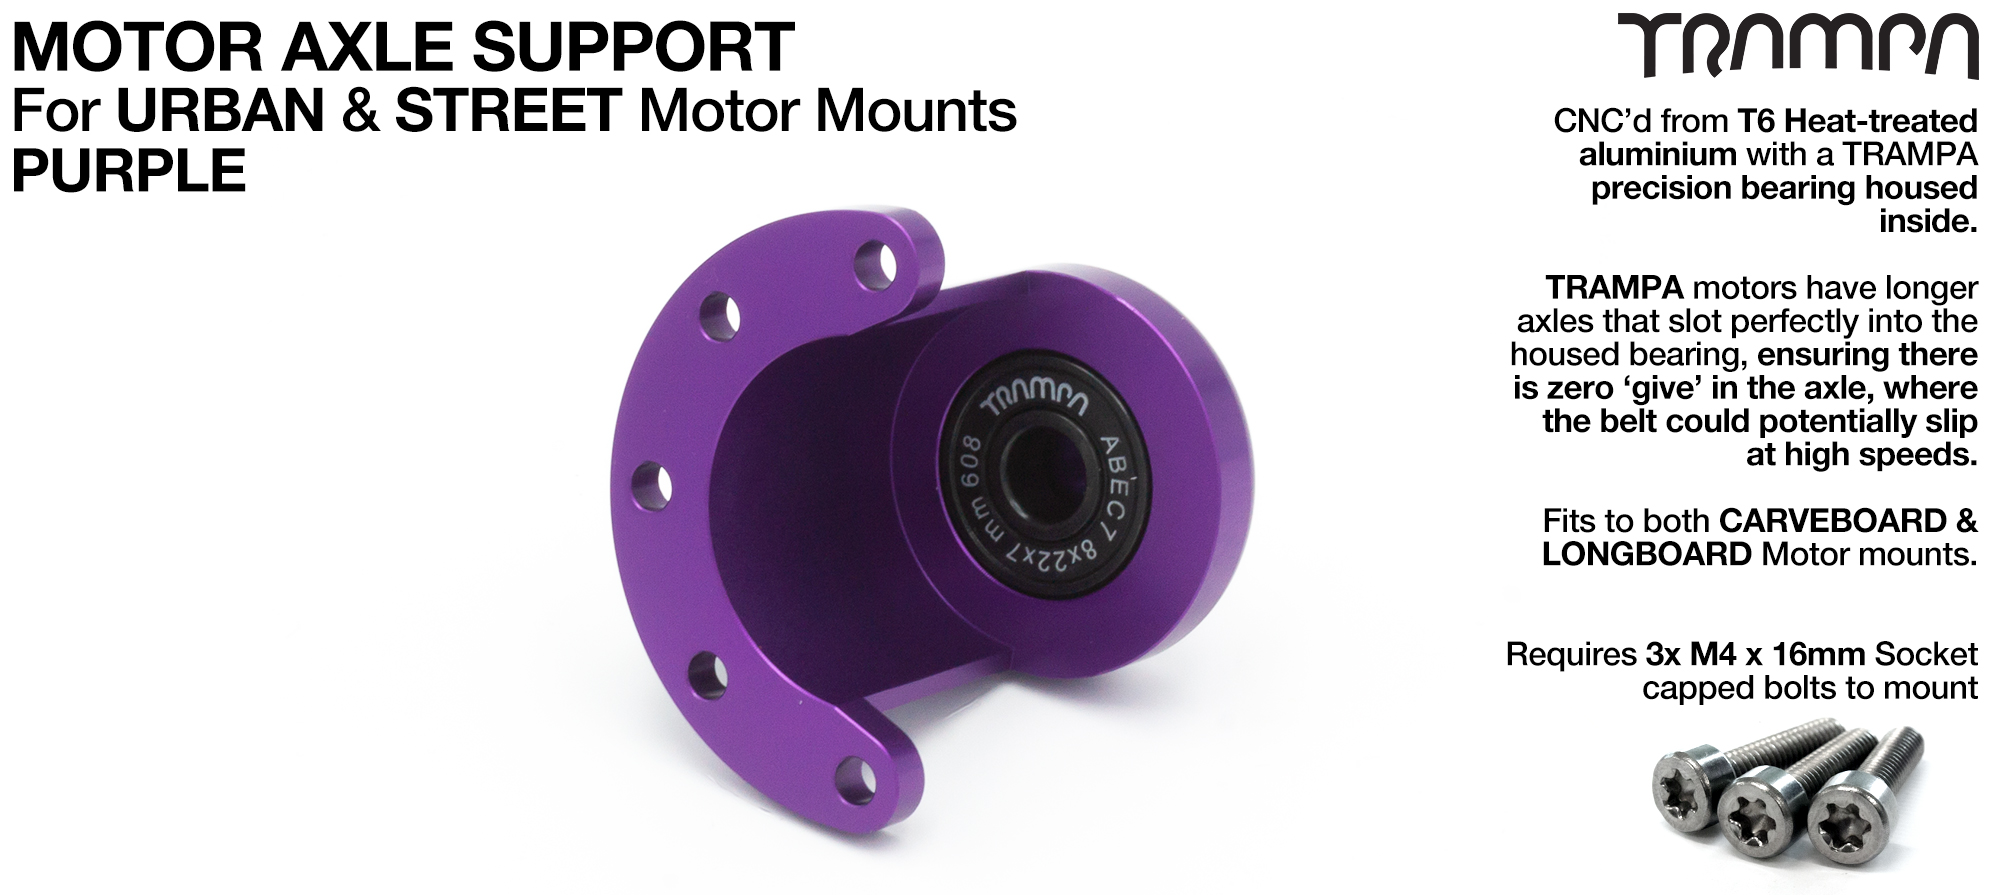 Motor Axle Support Housing with TRAMPA R608 8x22x7mm Bearing, C-Clip & Stainless Steel fixing Bolts for Mini Spring Truck MKII CARVE Motor Mounts UNIVERSAL - PURPLE